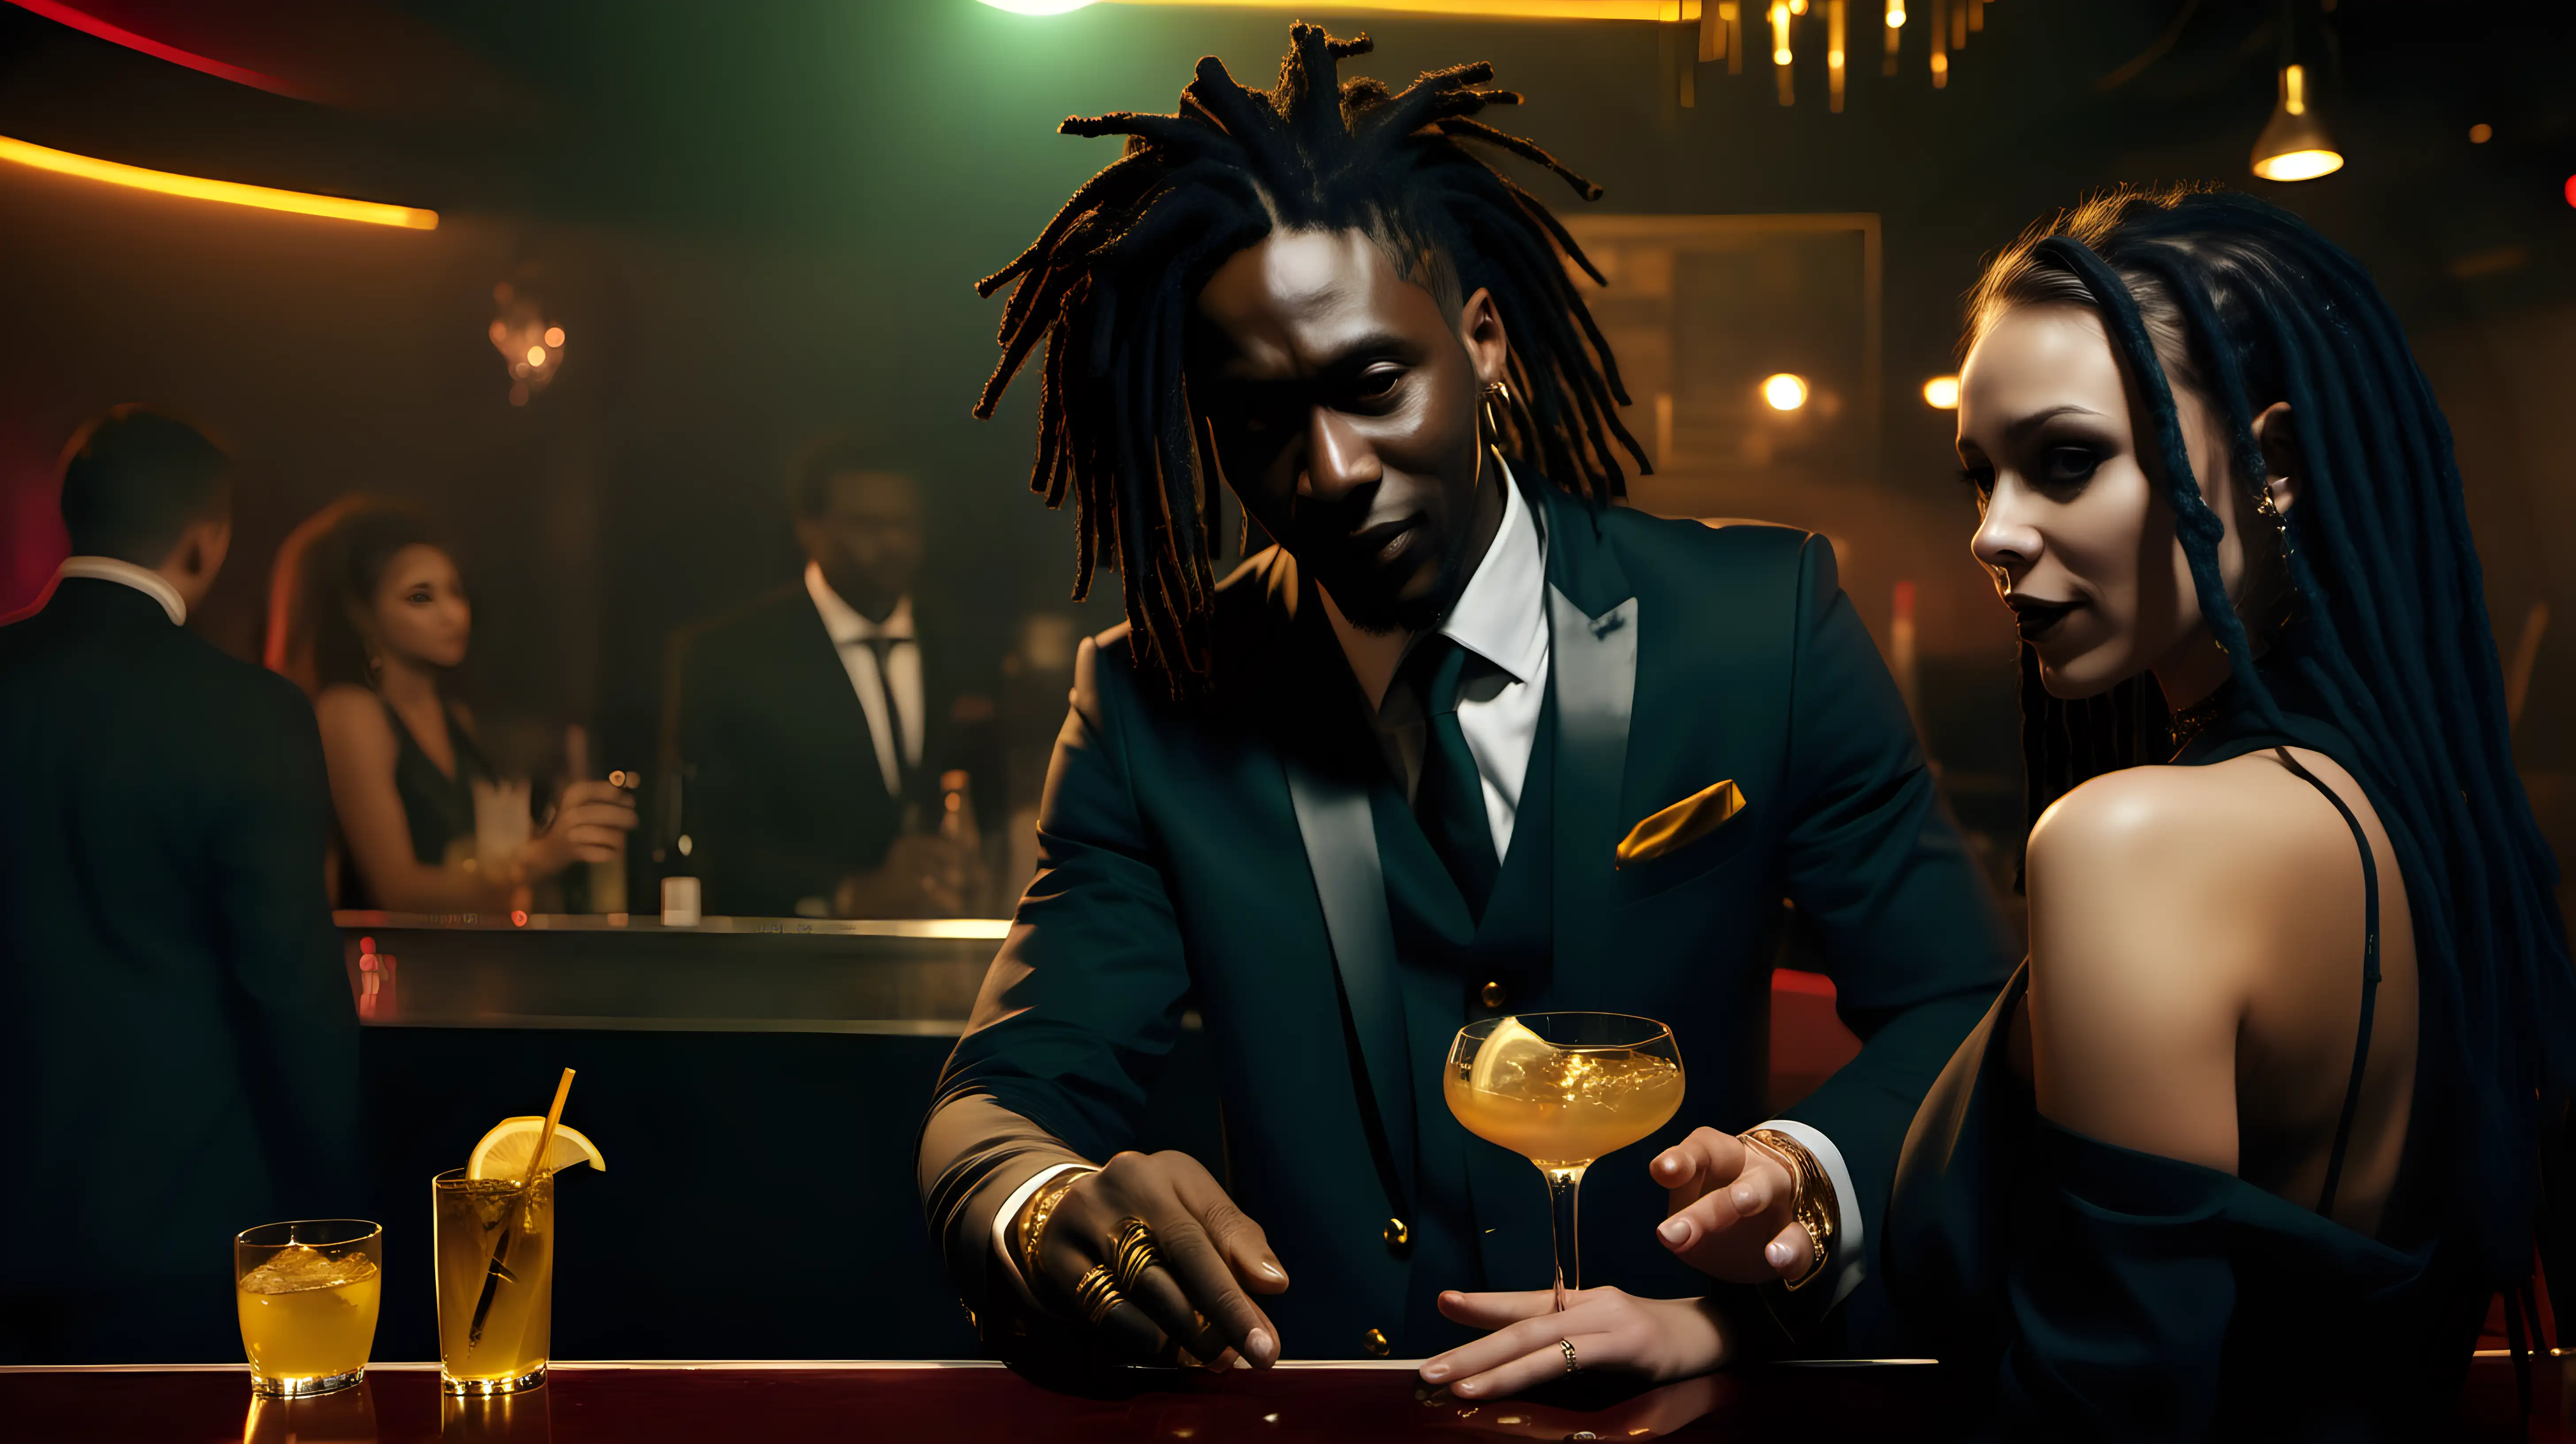 black man with black dreads wearing gold jewlery and a suit in the club. Observing a female bartender serving another customer drinks, with cinematic lighting, wide angle shot